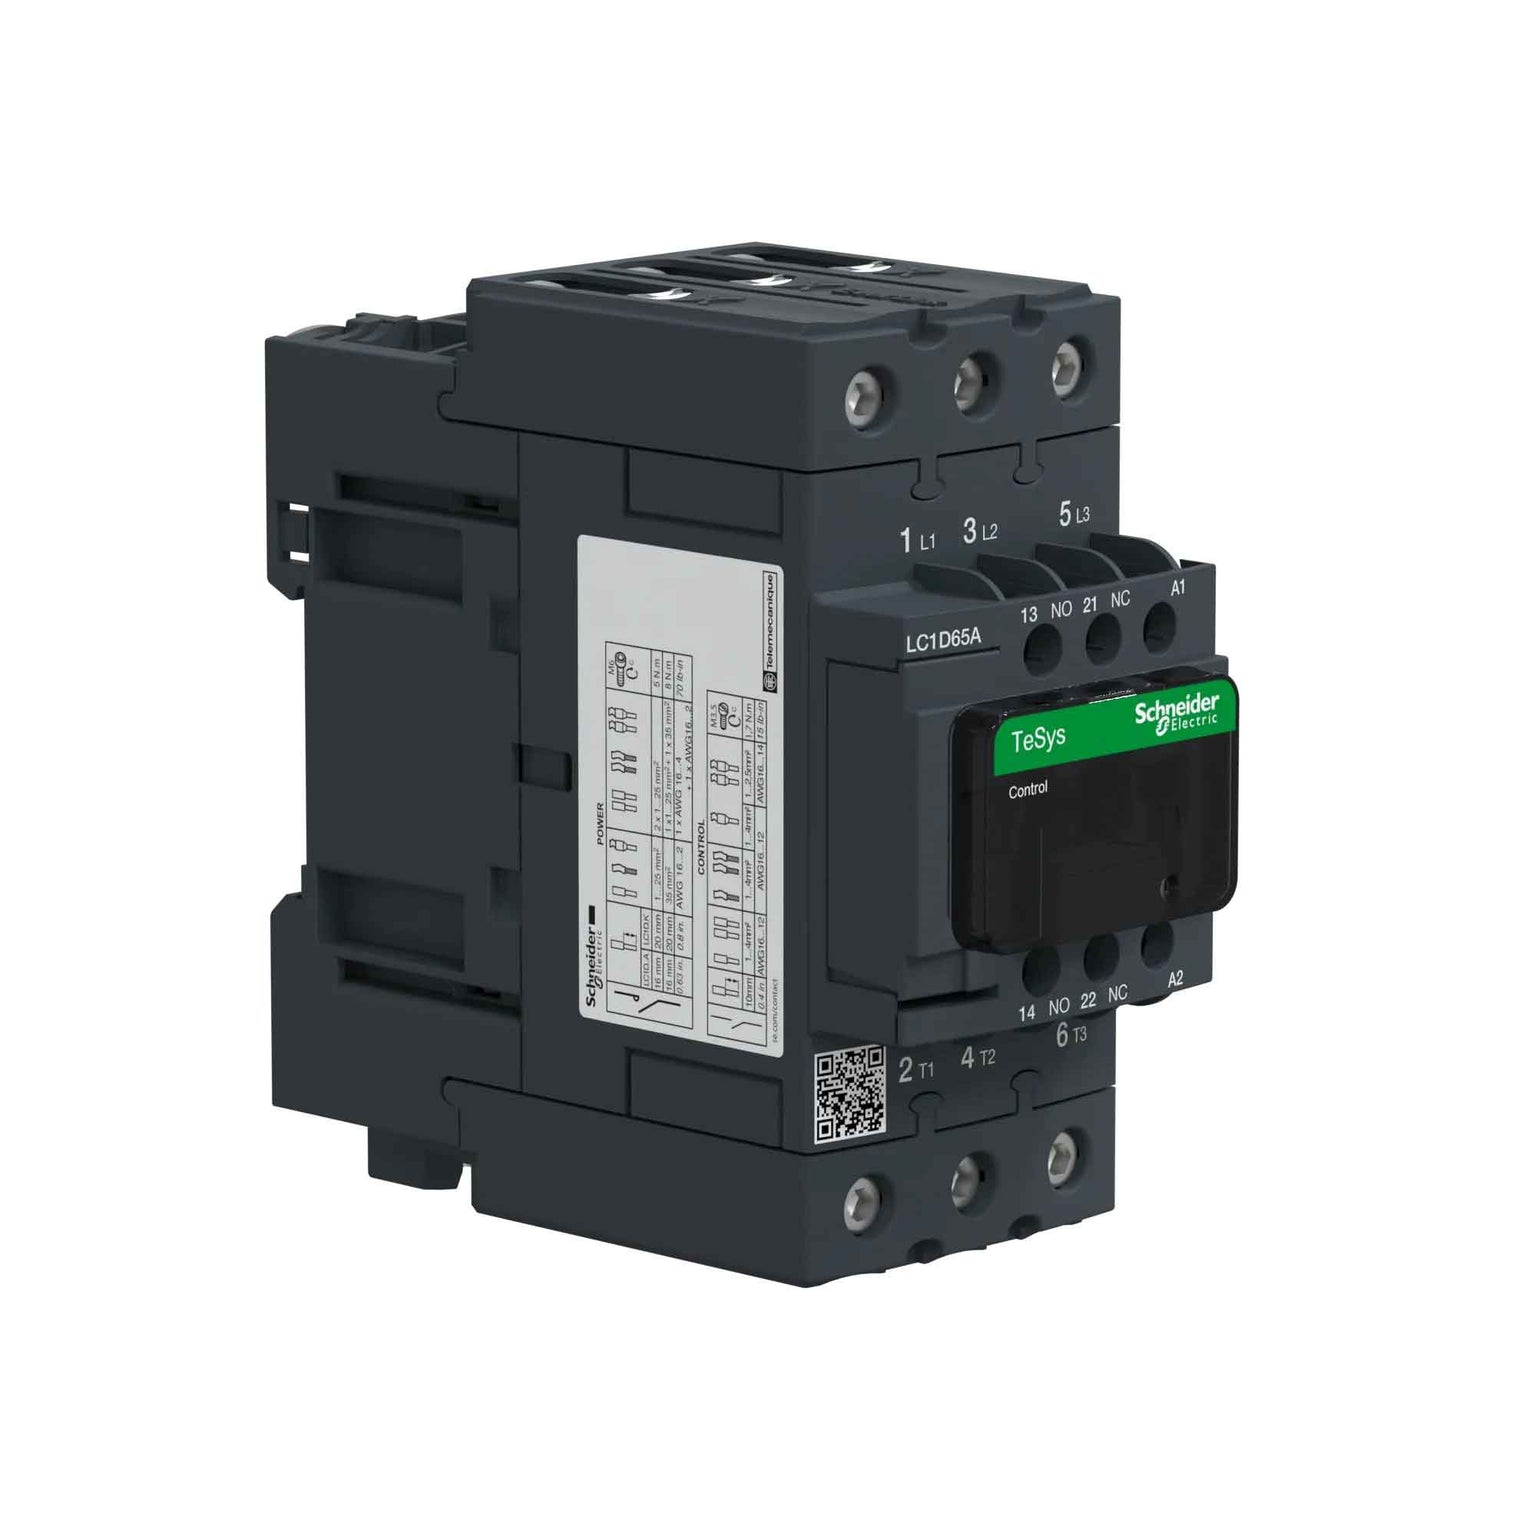 LC1D65AB7 - Square D - Magnetic Contactor